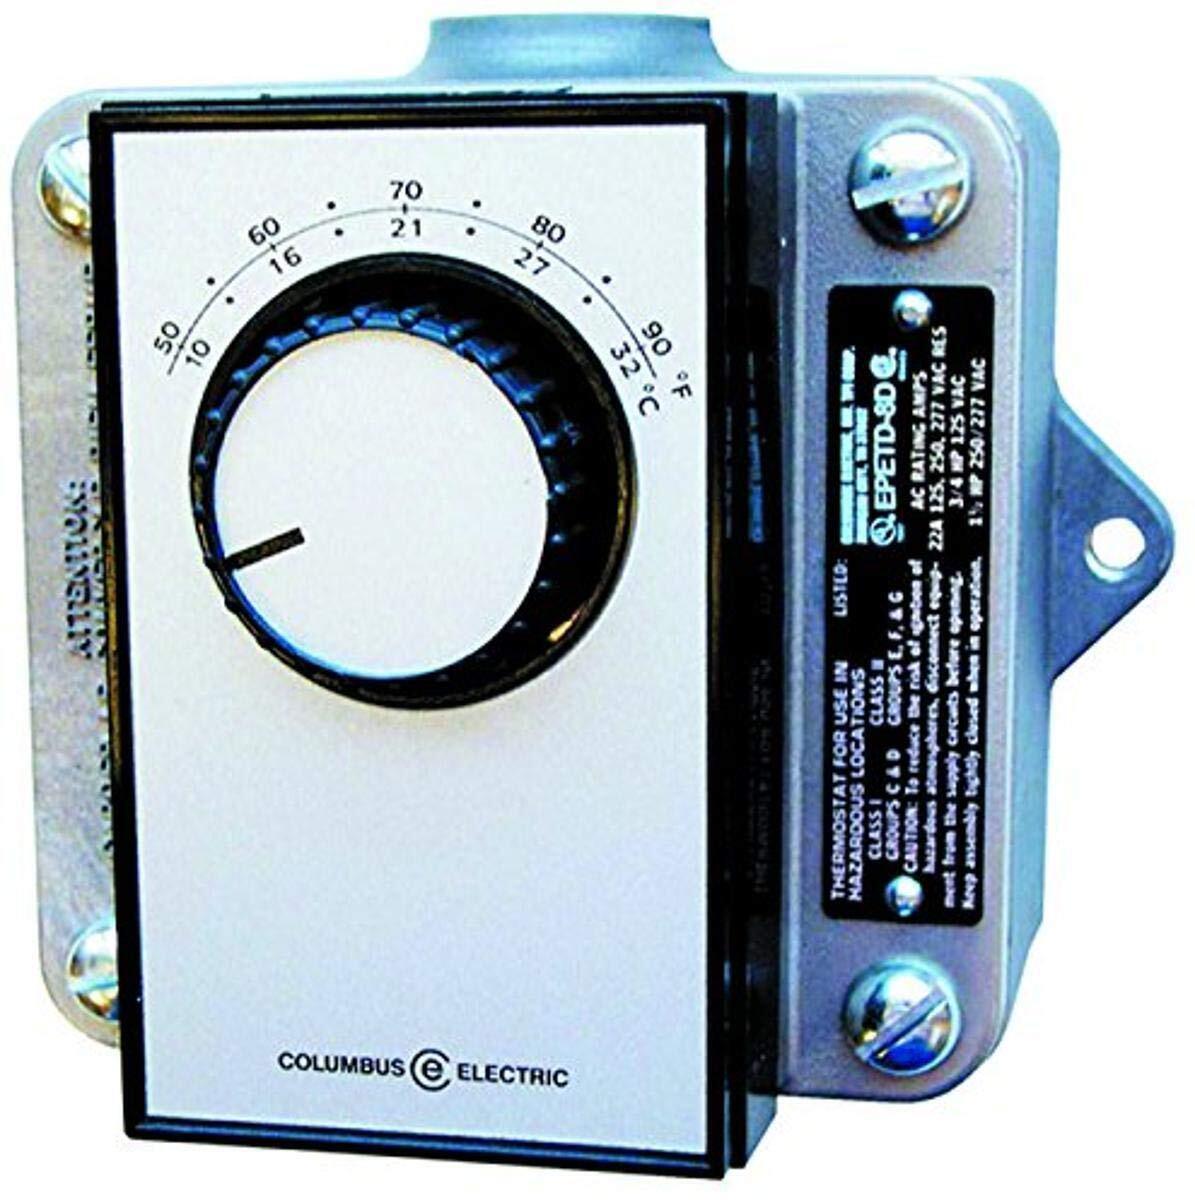 TPI Corporation EPETP8D Hazardous Location Wall Mount Thermostat, Double Pole,